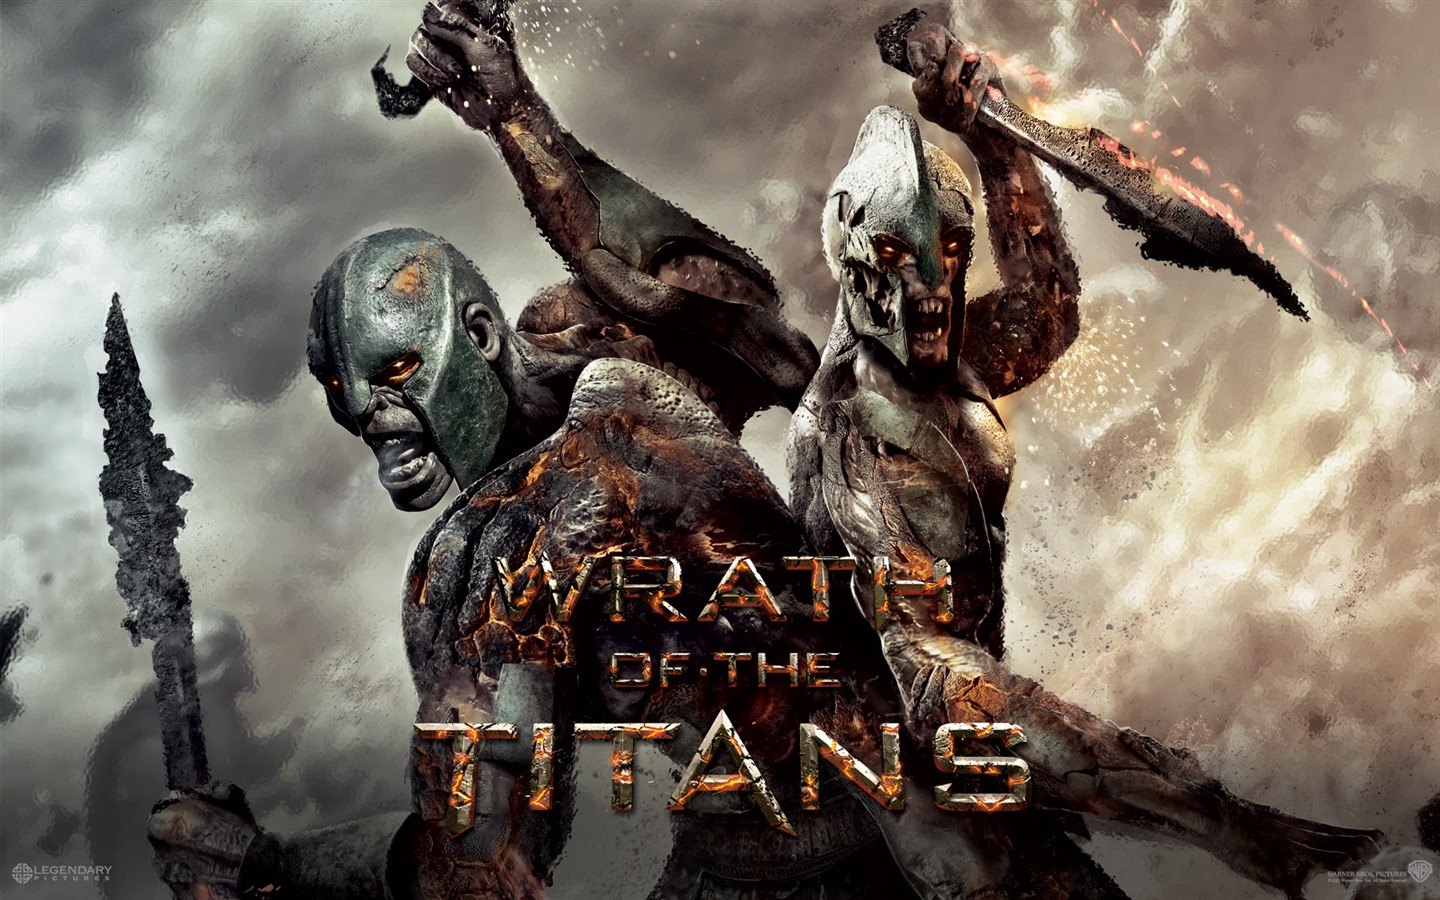 Wrath of the Titans HD wallpapers #6 - 1440x900